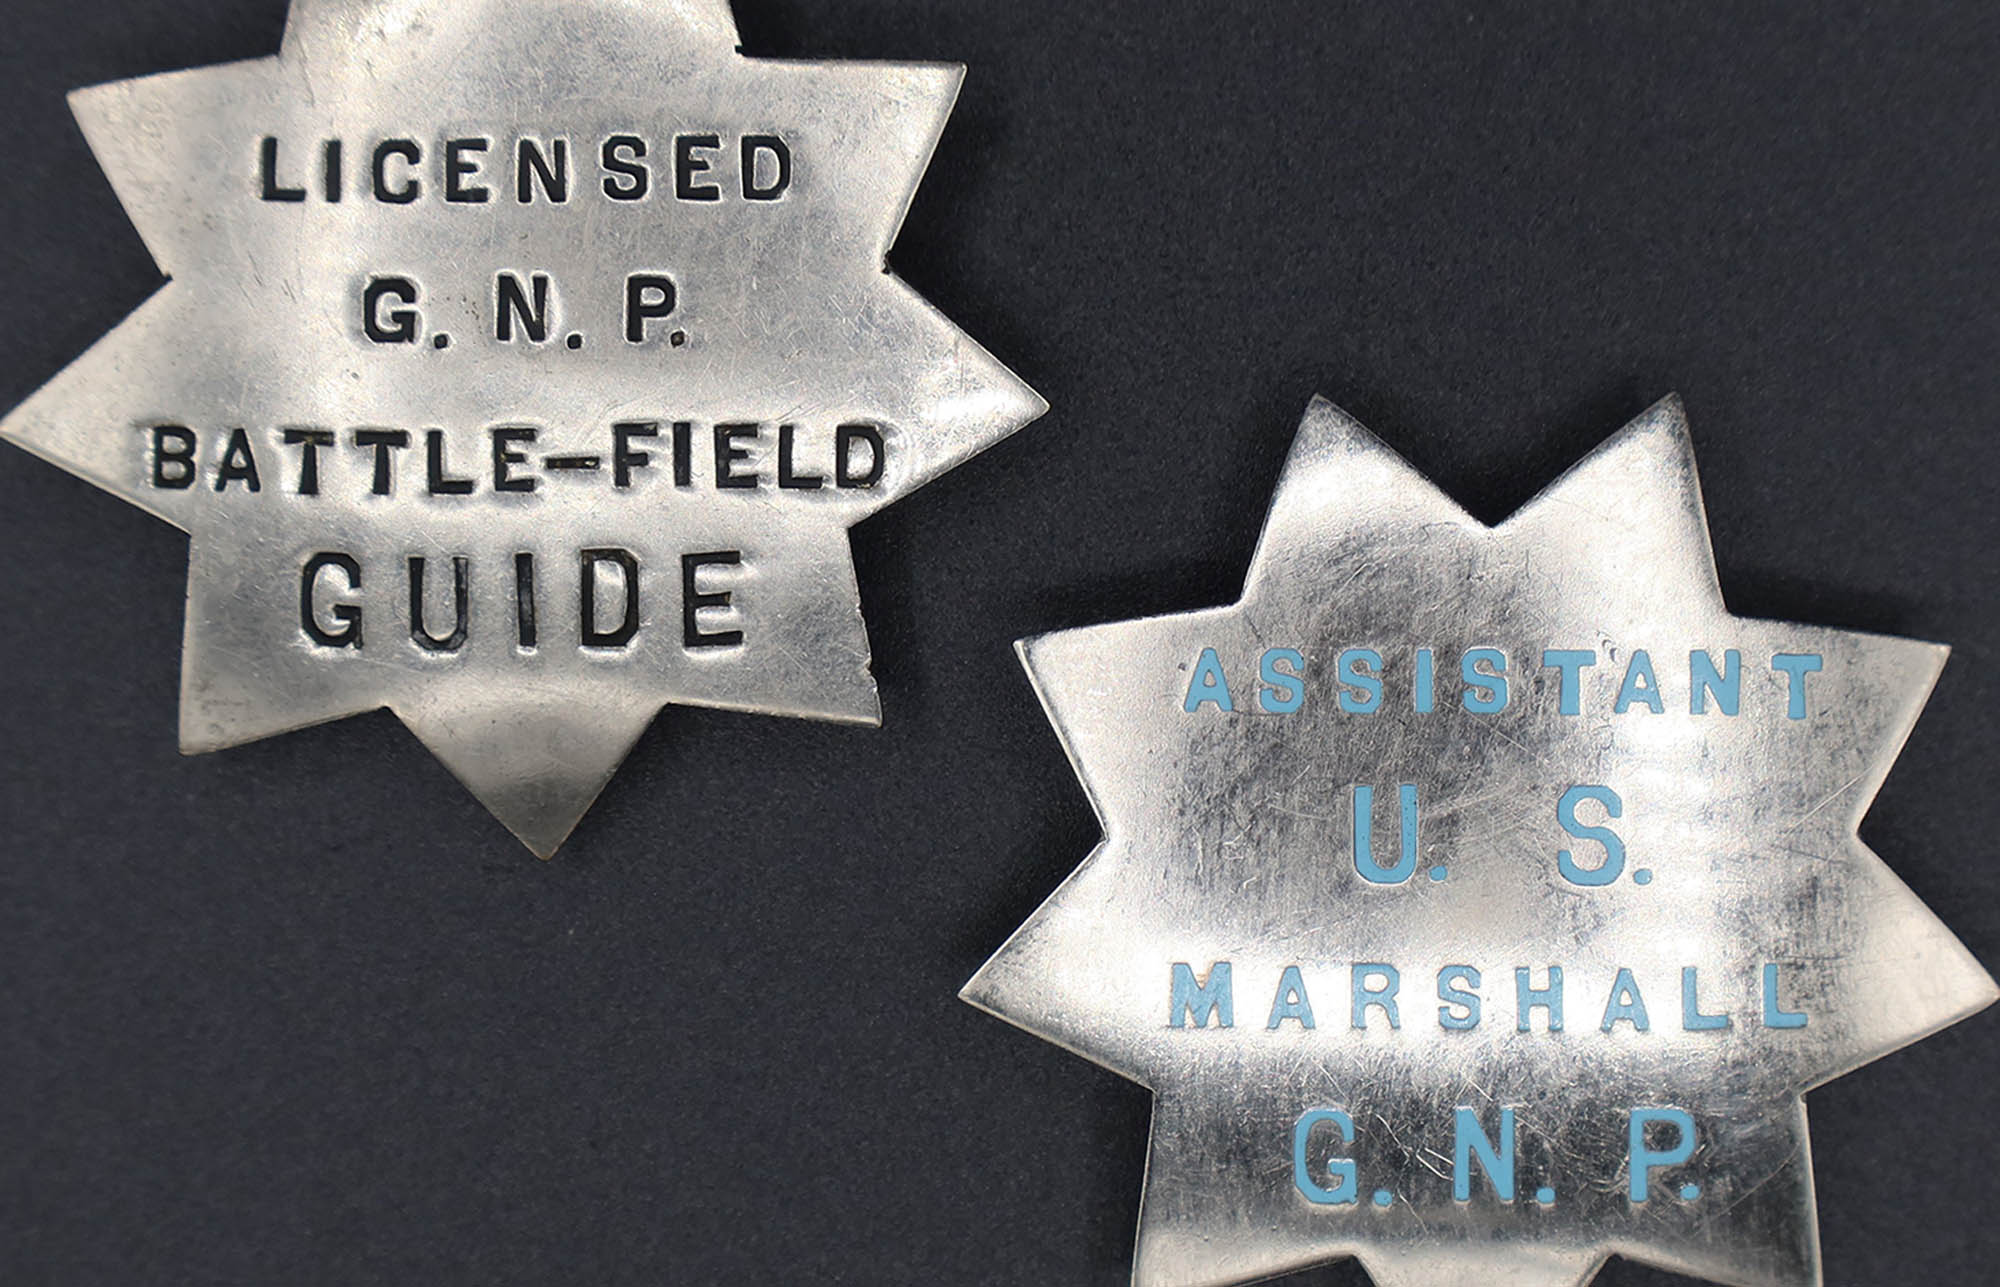 Two silver badges shaped as 9-point stars. One is marked with black letters for a licensed guide. The other in blue for an assistant marshal.